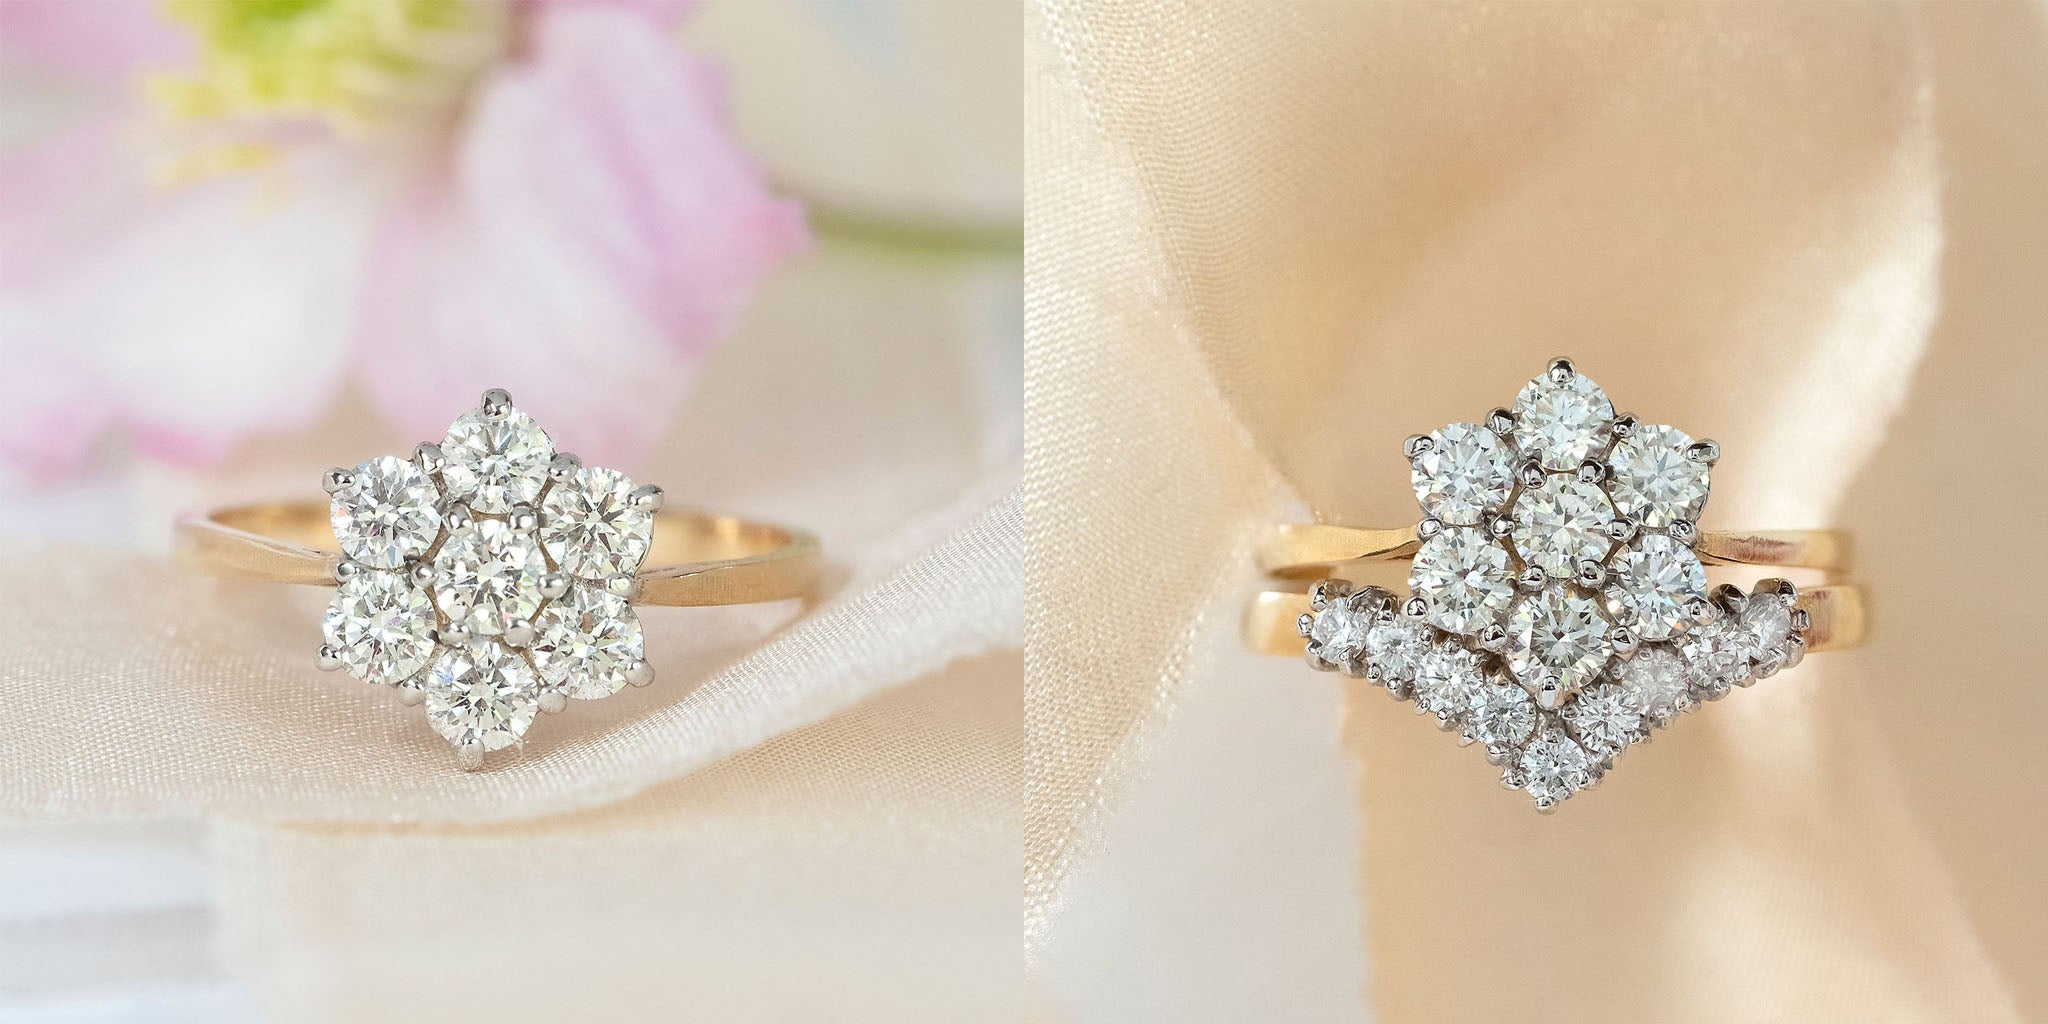 Diamond daisy cluster engagement ring with and without matching wedding ring